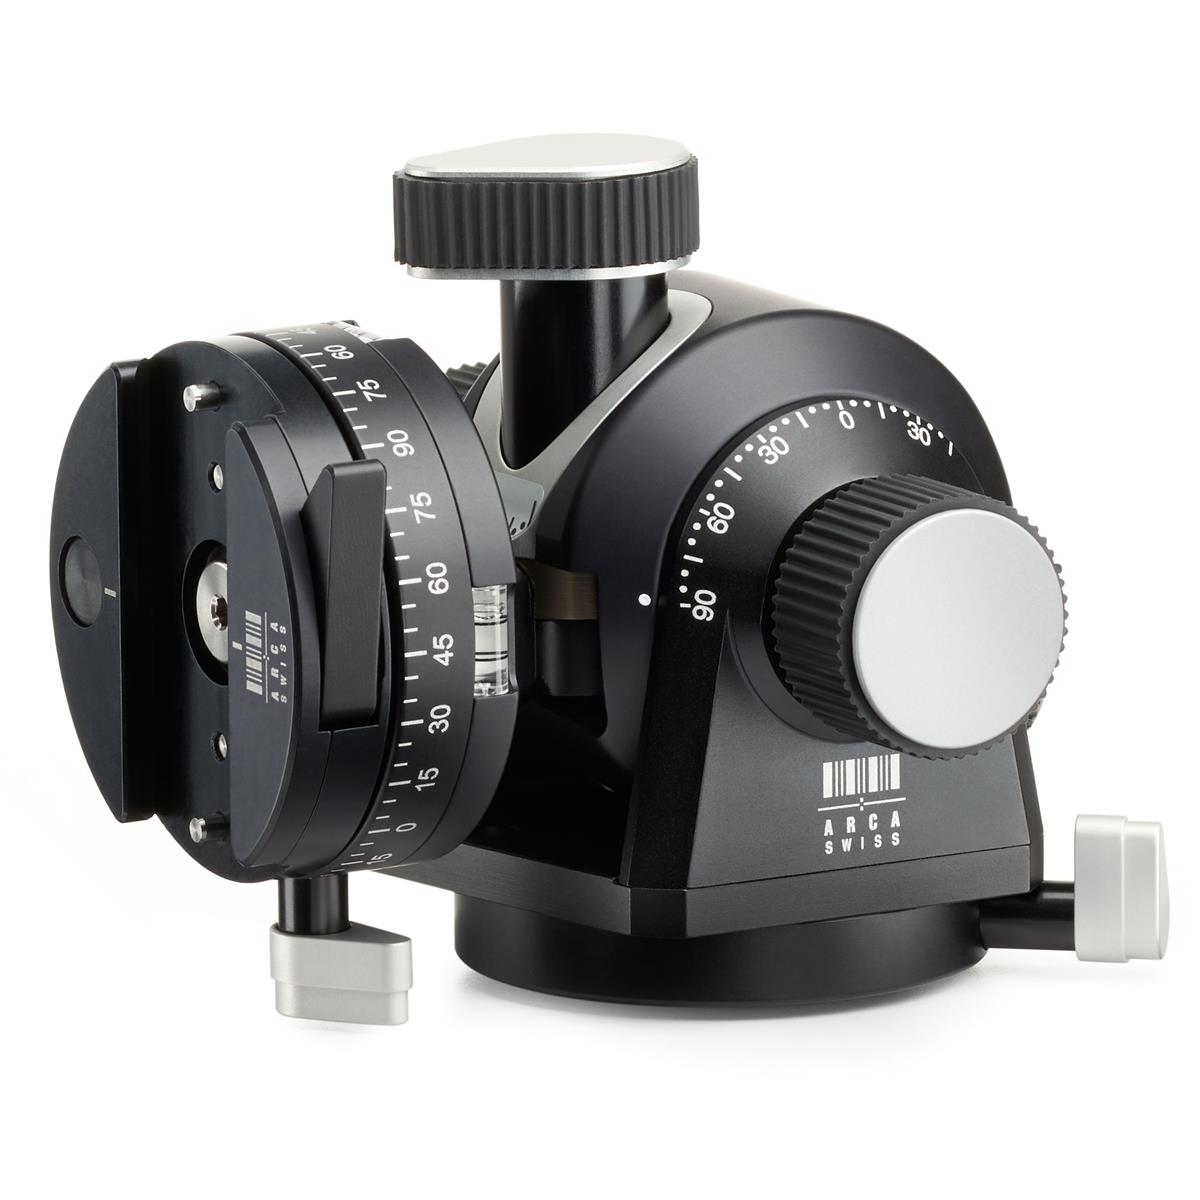 Image of Arca Swiss d4 Geared Tripod Head with Quick Set MonoballFix (Plate Not Included)